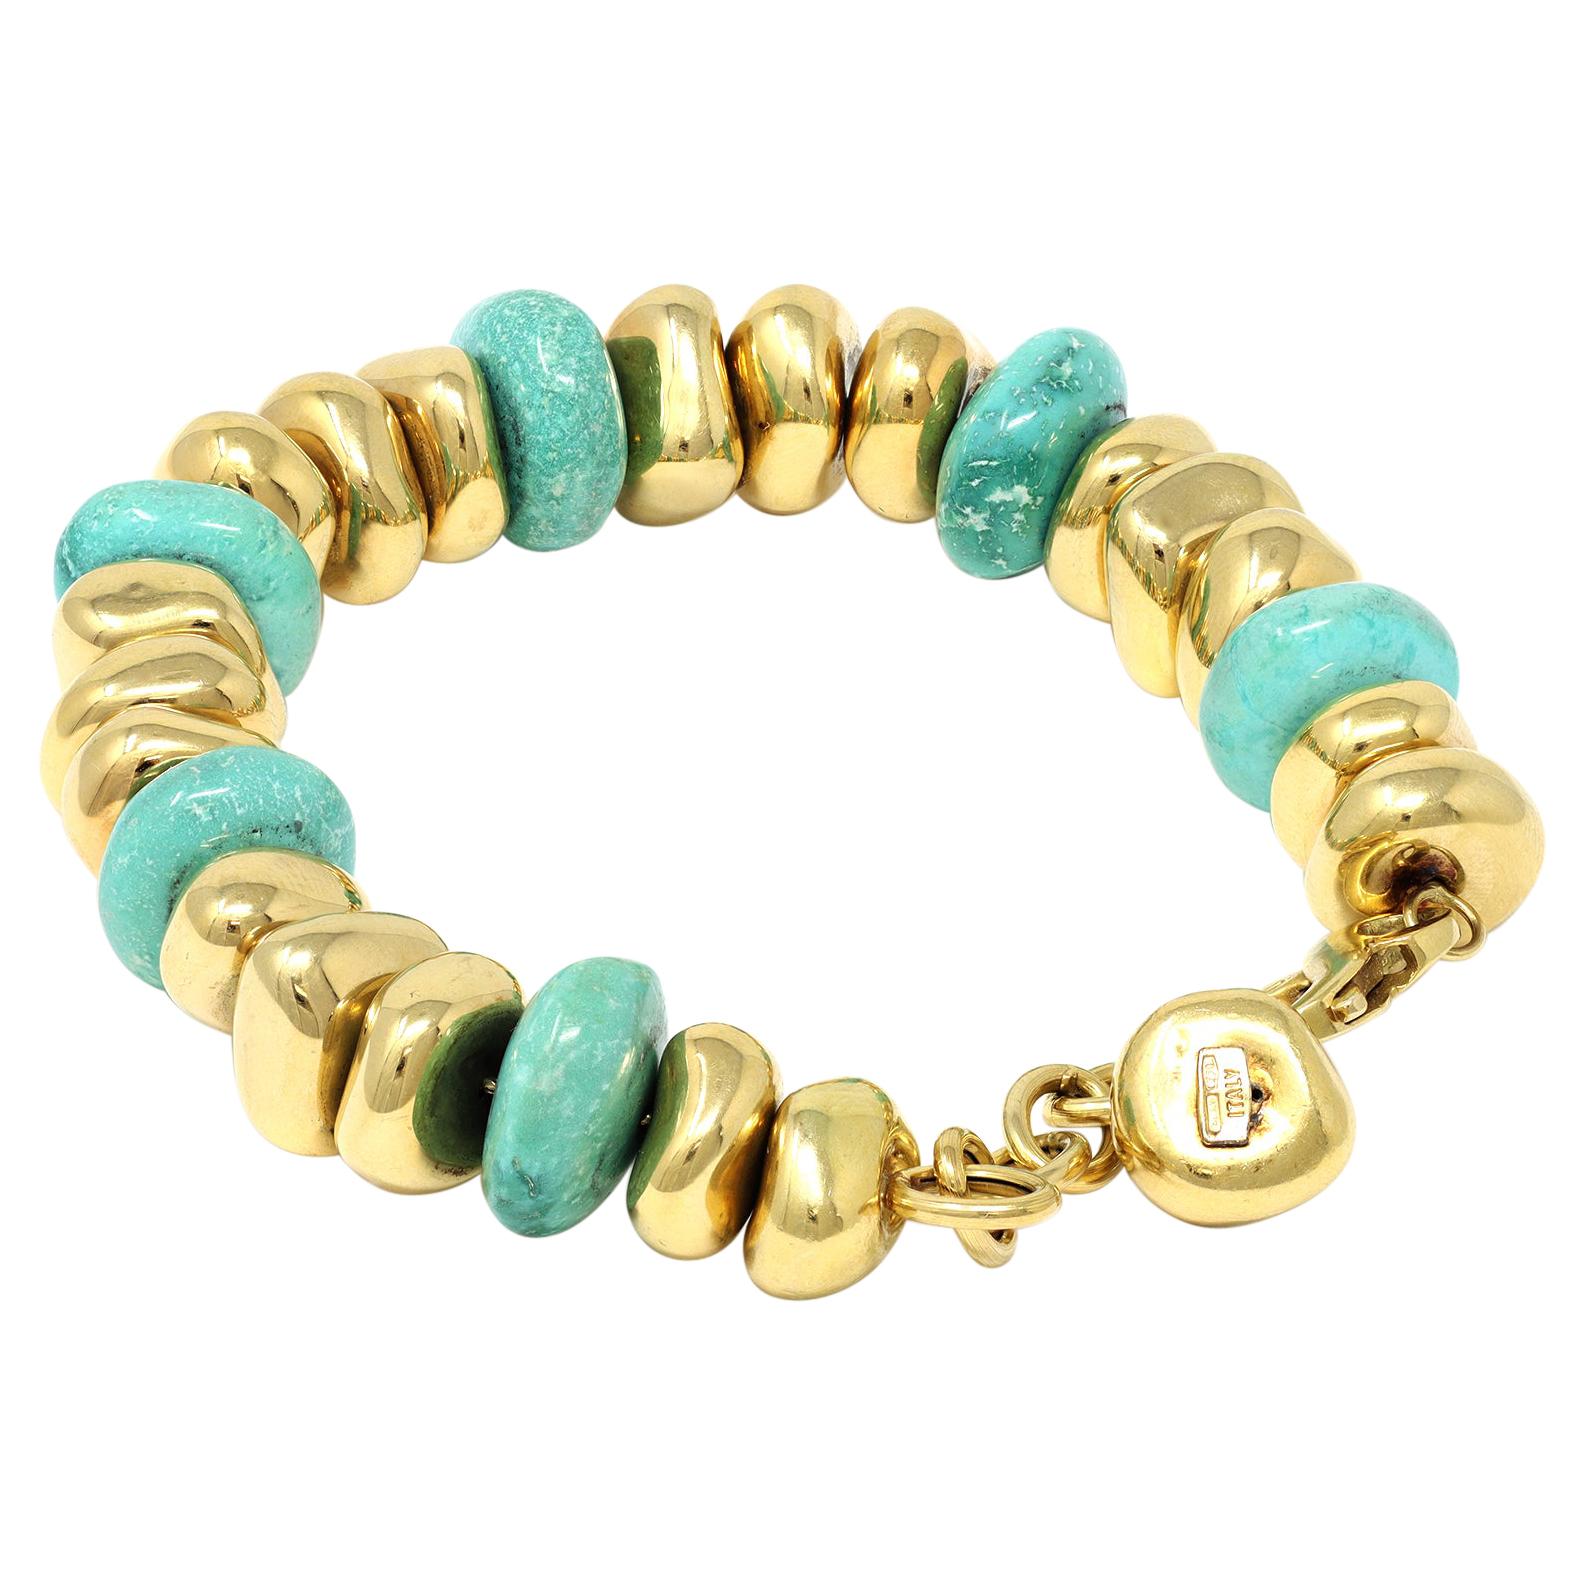 Turquoise and Gold Pebble Beads Bracelet in 18k Made in Italy